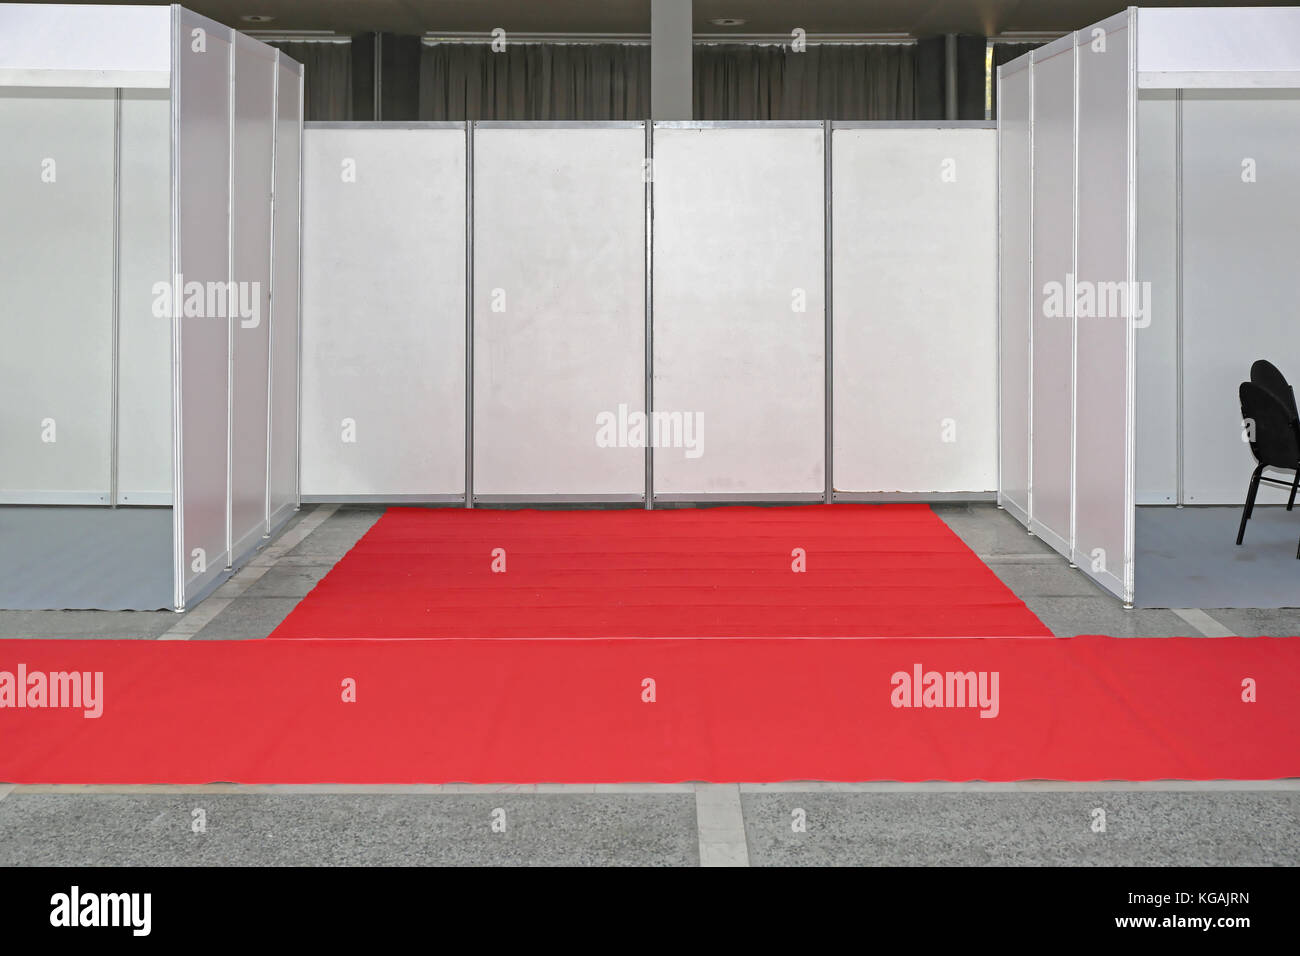 Empty Exibition Trade Space With Red Carpet Stock Photo